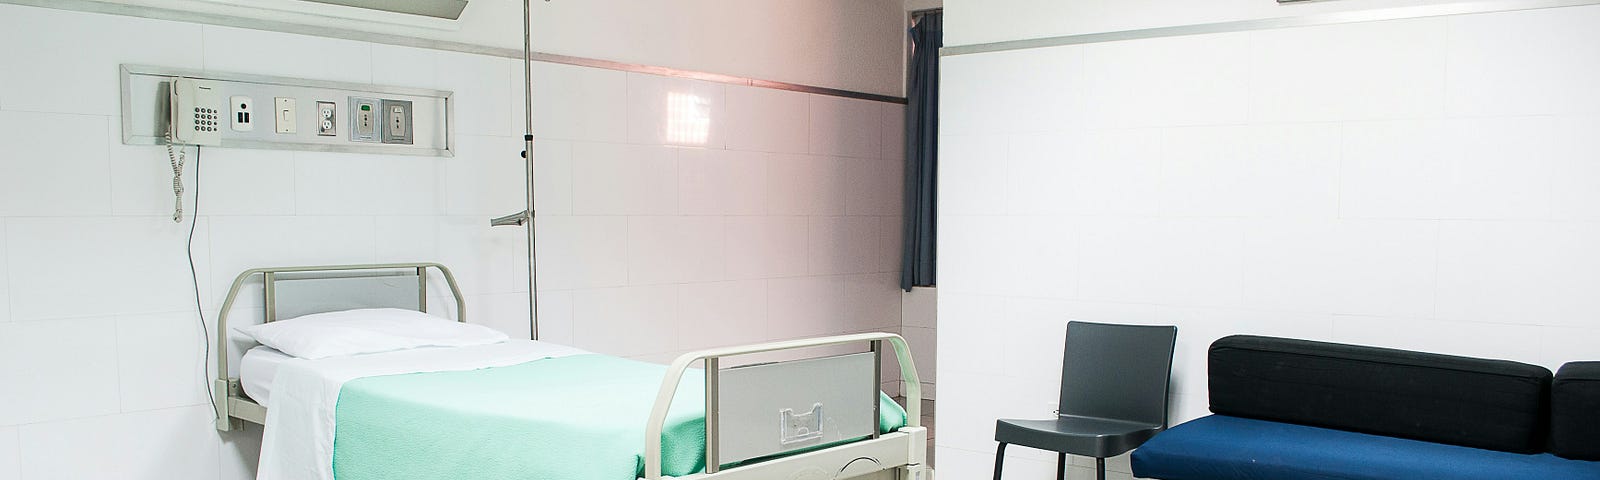 A typical hospital bed, with IV stand next to it.